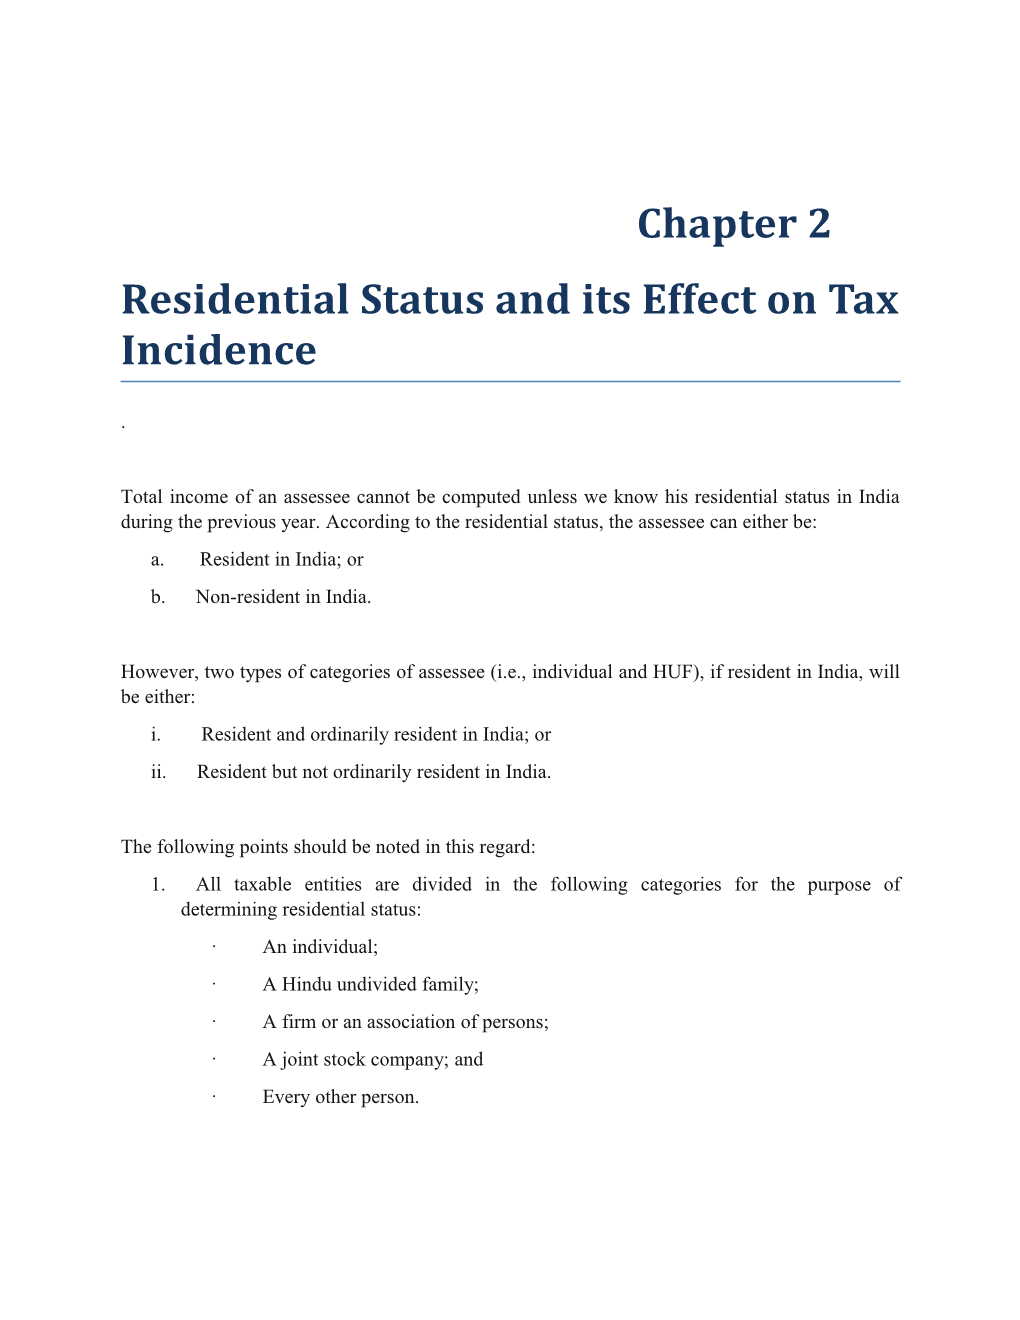 Residential Status and Its Effect on Tax Incidence